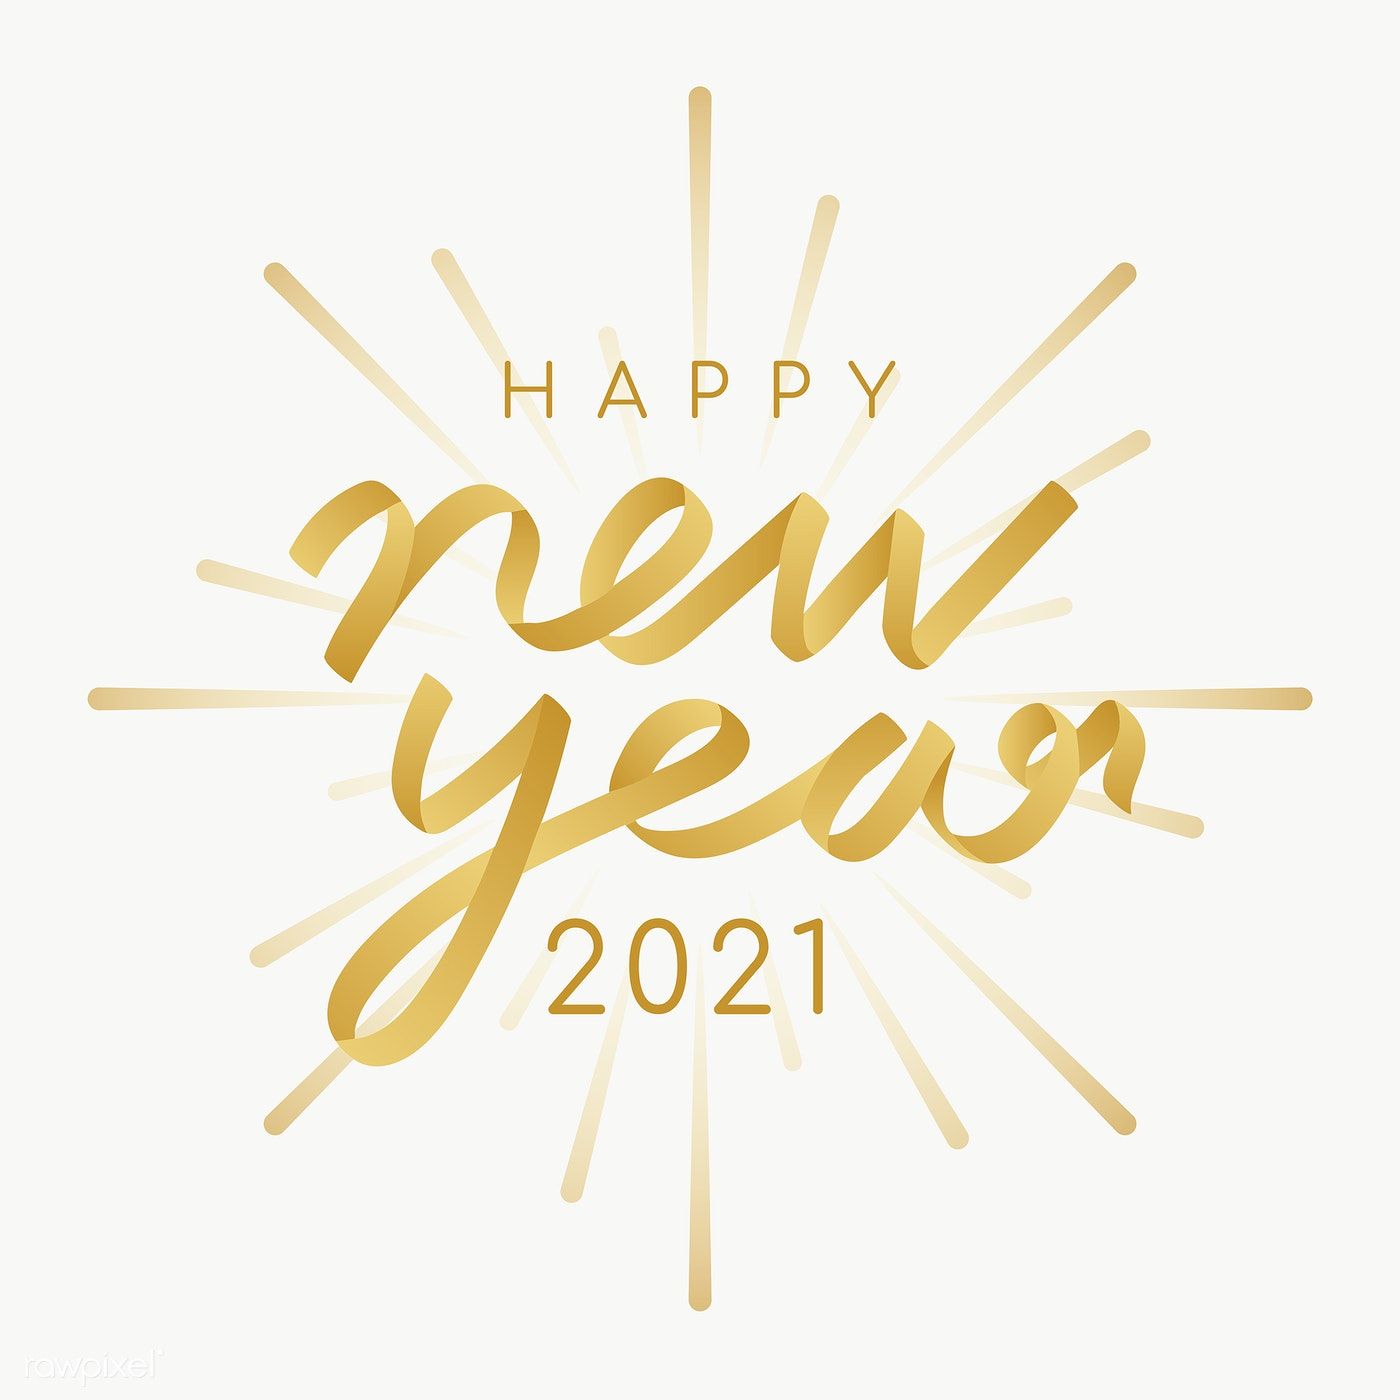 Happy New Year 2021 Clipart Vector Png Free Download Follow us for regular updates on awesome new wallpapers! happy new year 2021 clipart vector